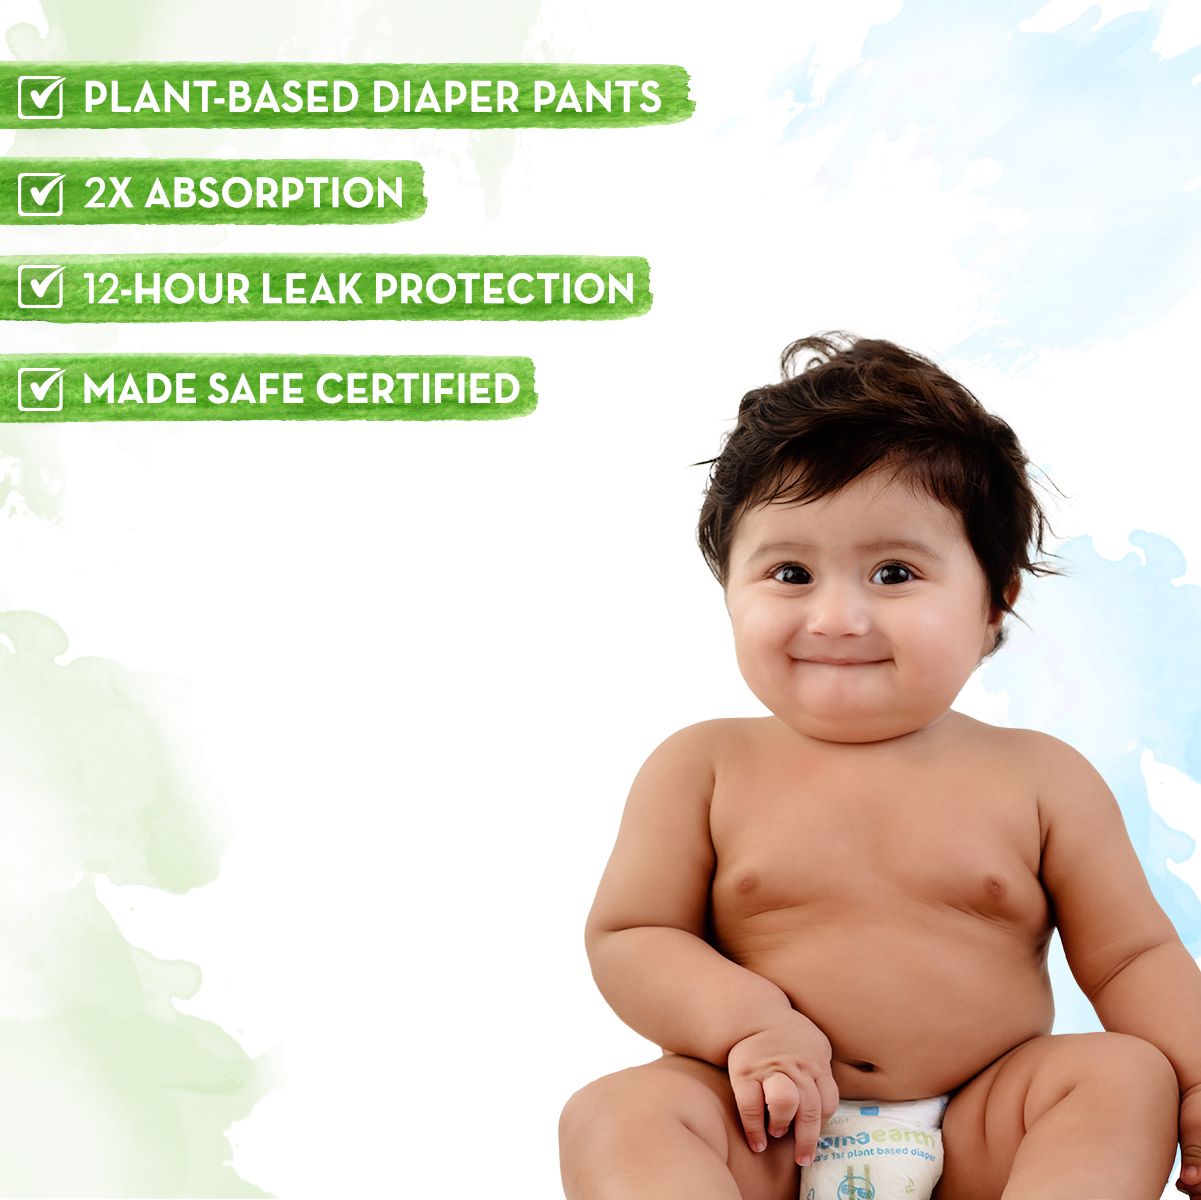 Buy Pampers Diaper Pants  Extra small Online at Best Price of Rs 44925   bigbasket